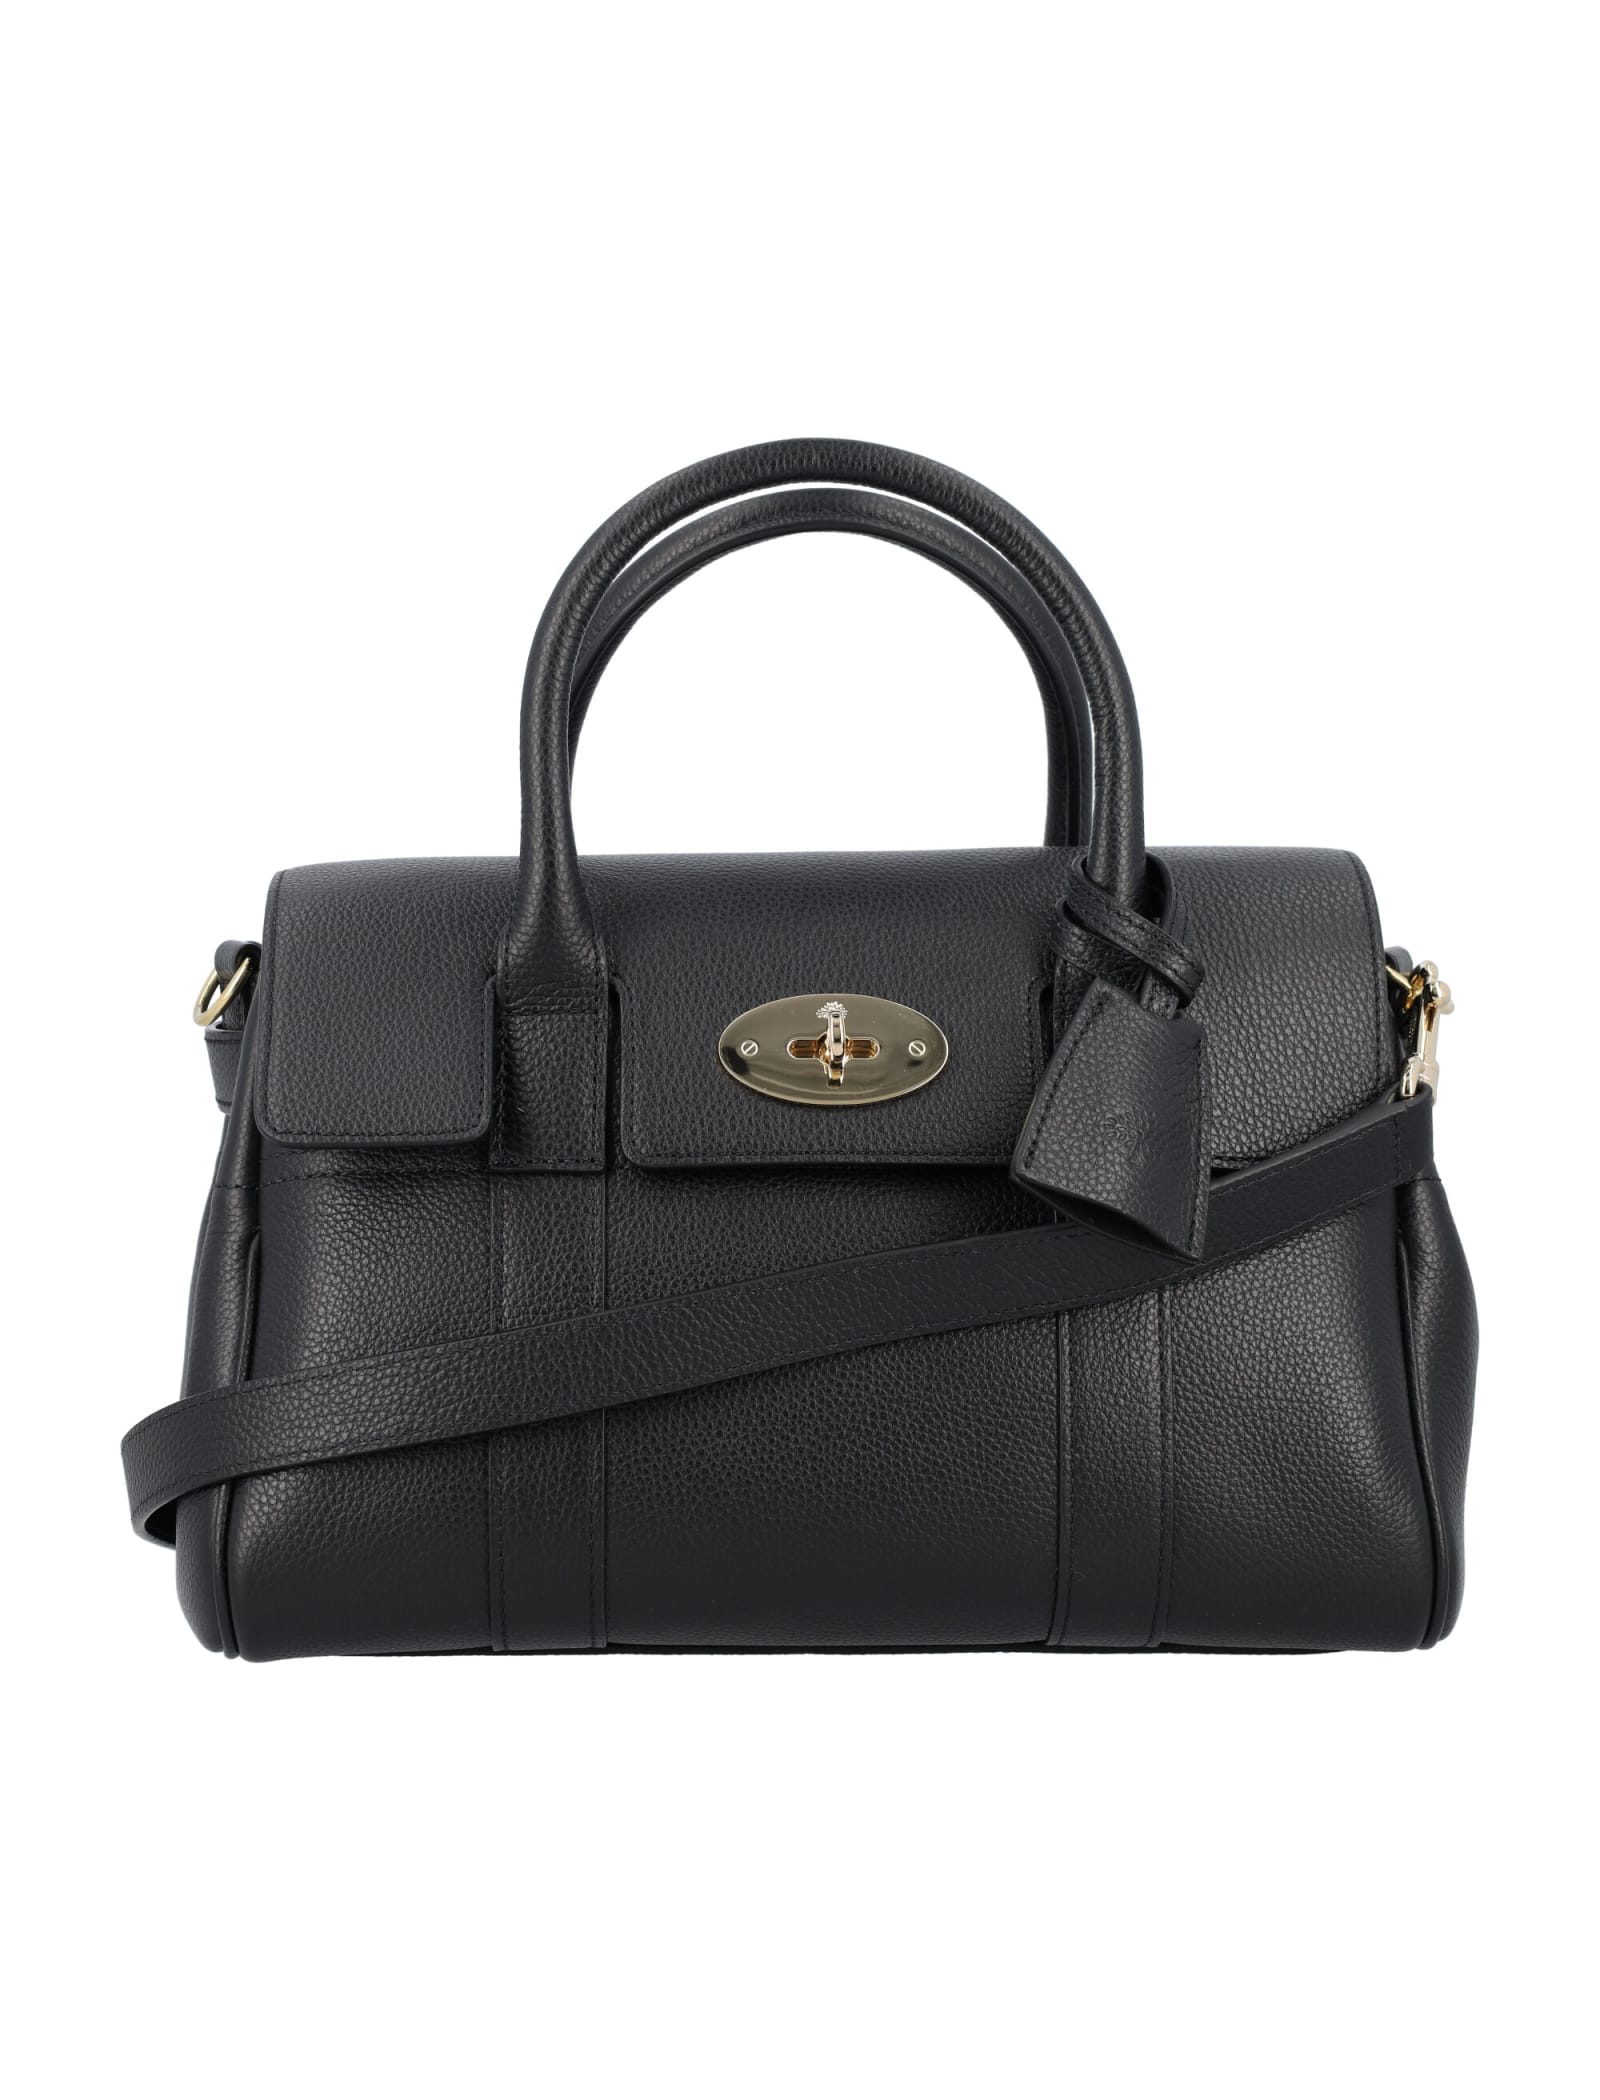 MULBERRY SMALL BAYSWATER SATCHEL BAG